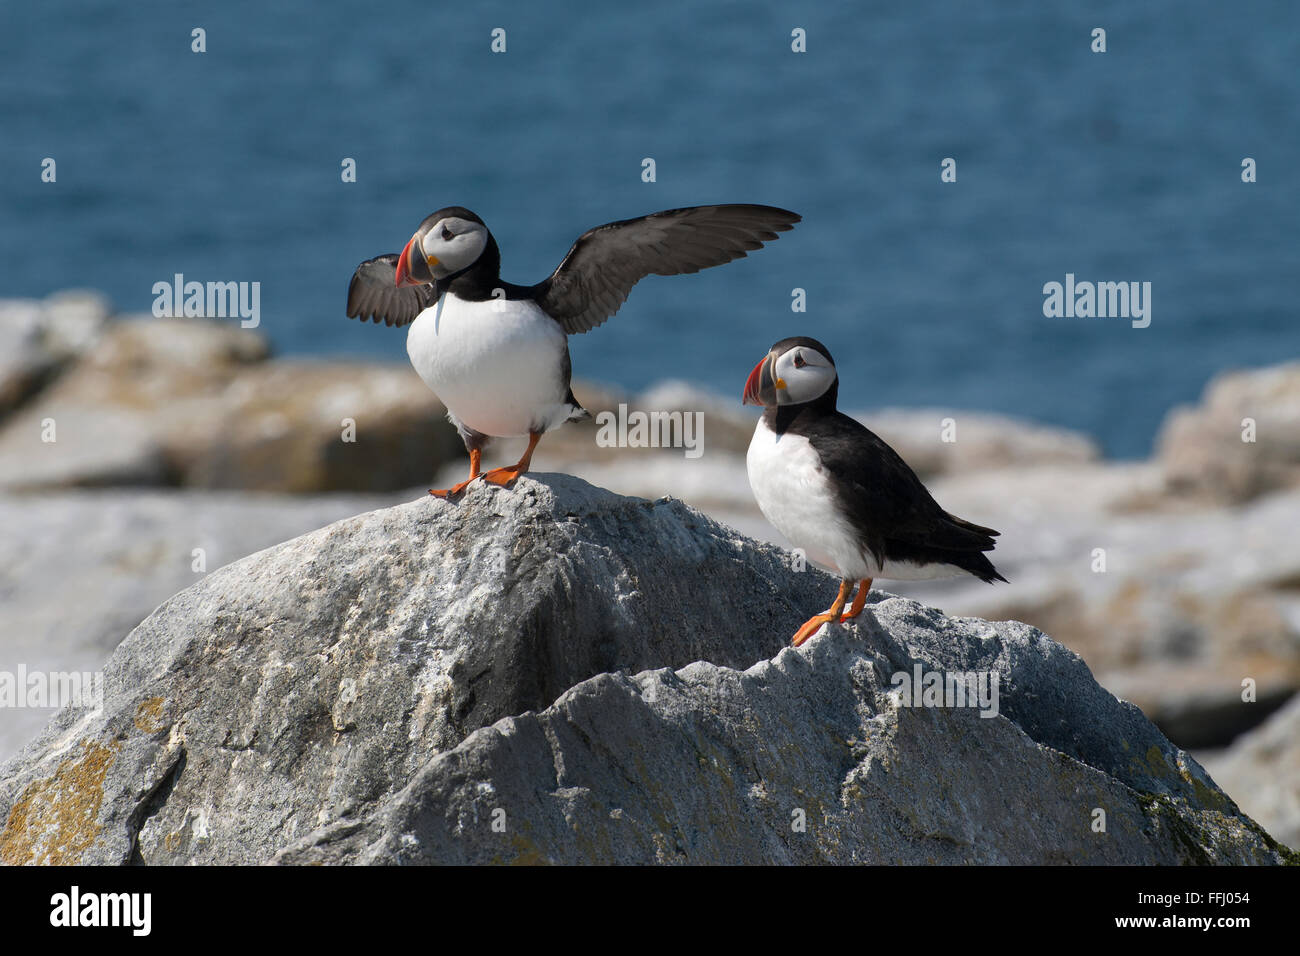 Atlantic puffin flaps its wings in warning when protecting its nesting area as other stands guard. These endangered birds are a summer attraction. Stock Photo